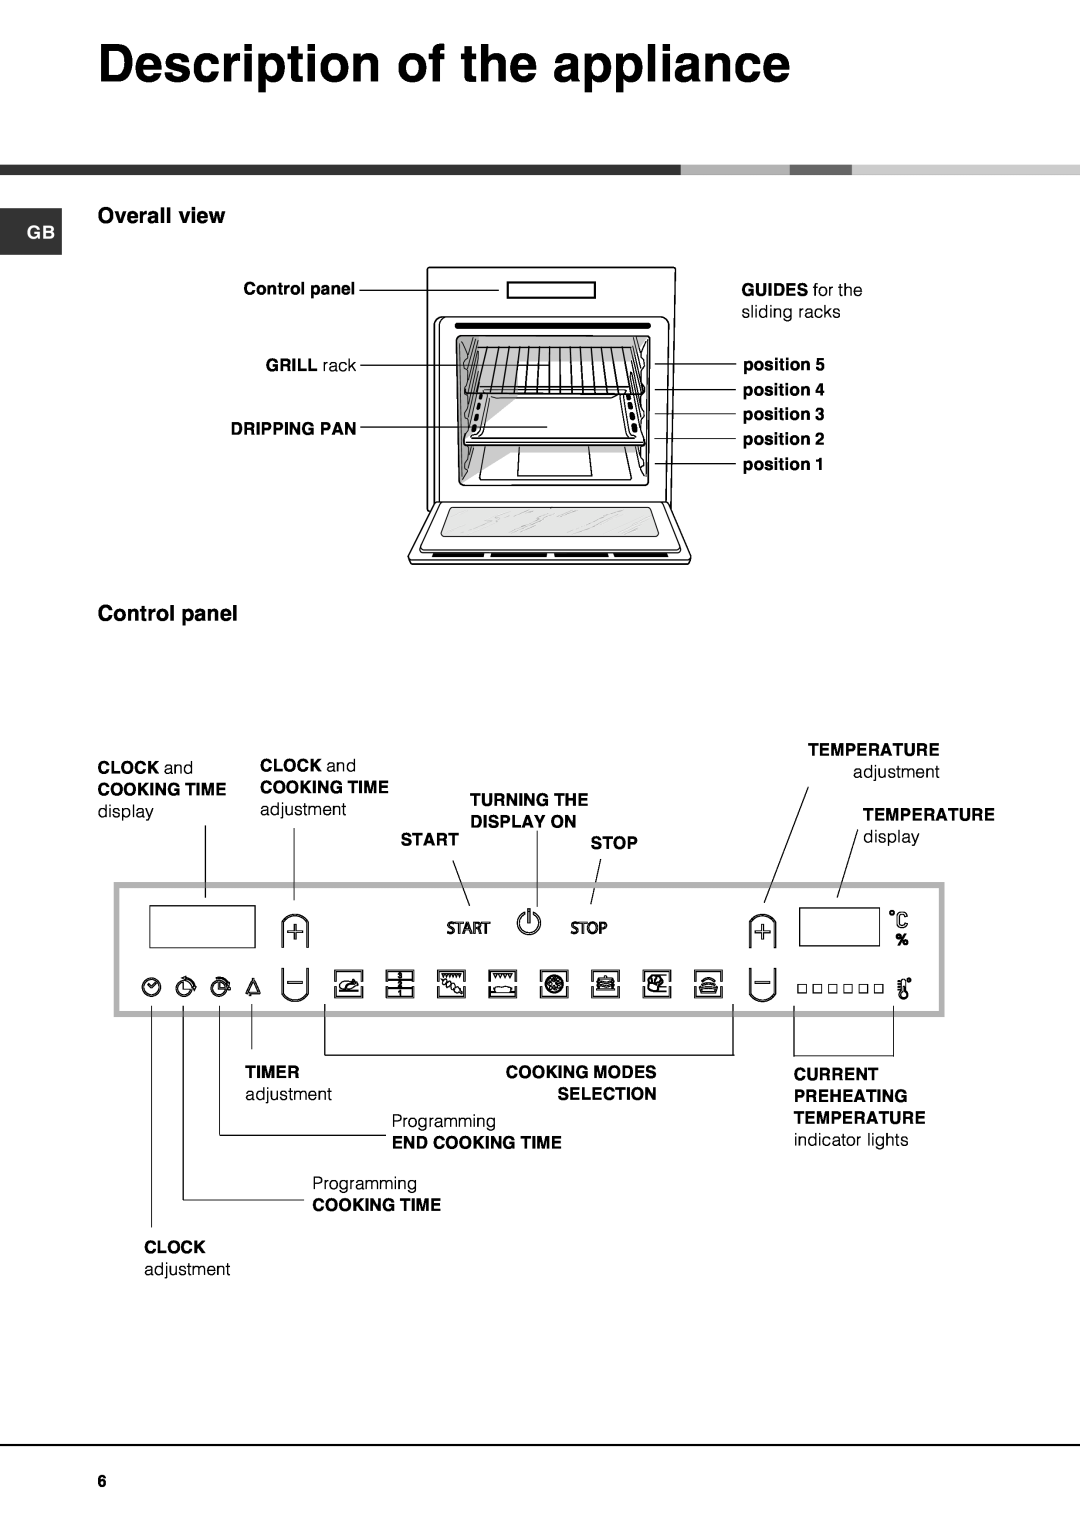 Hotpoint SE1002X manual Description of the appliance, Overall view, Control panel 